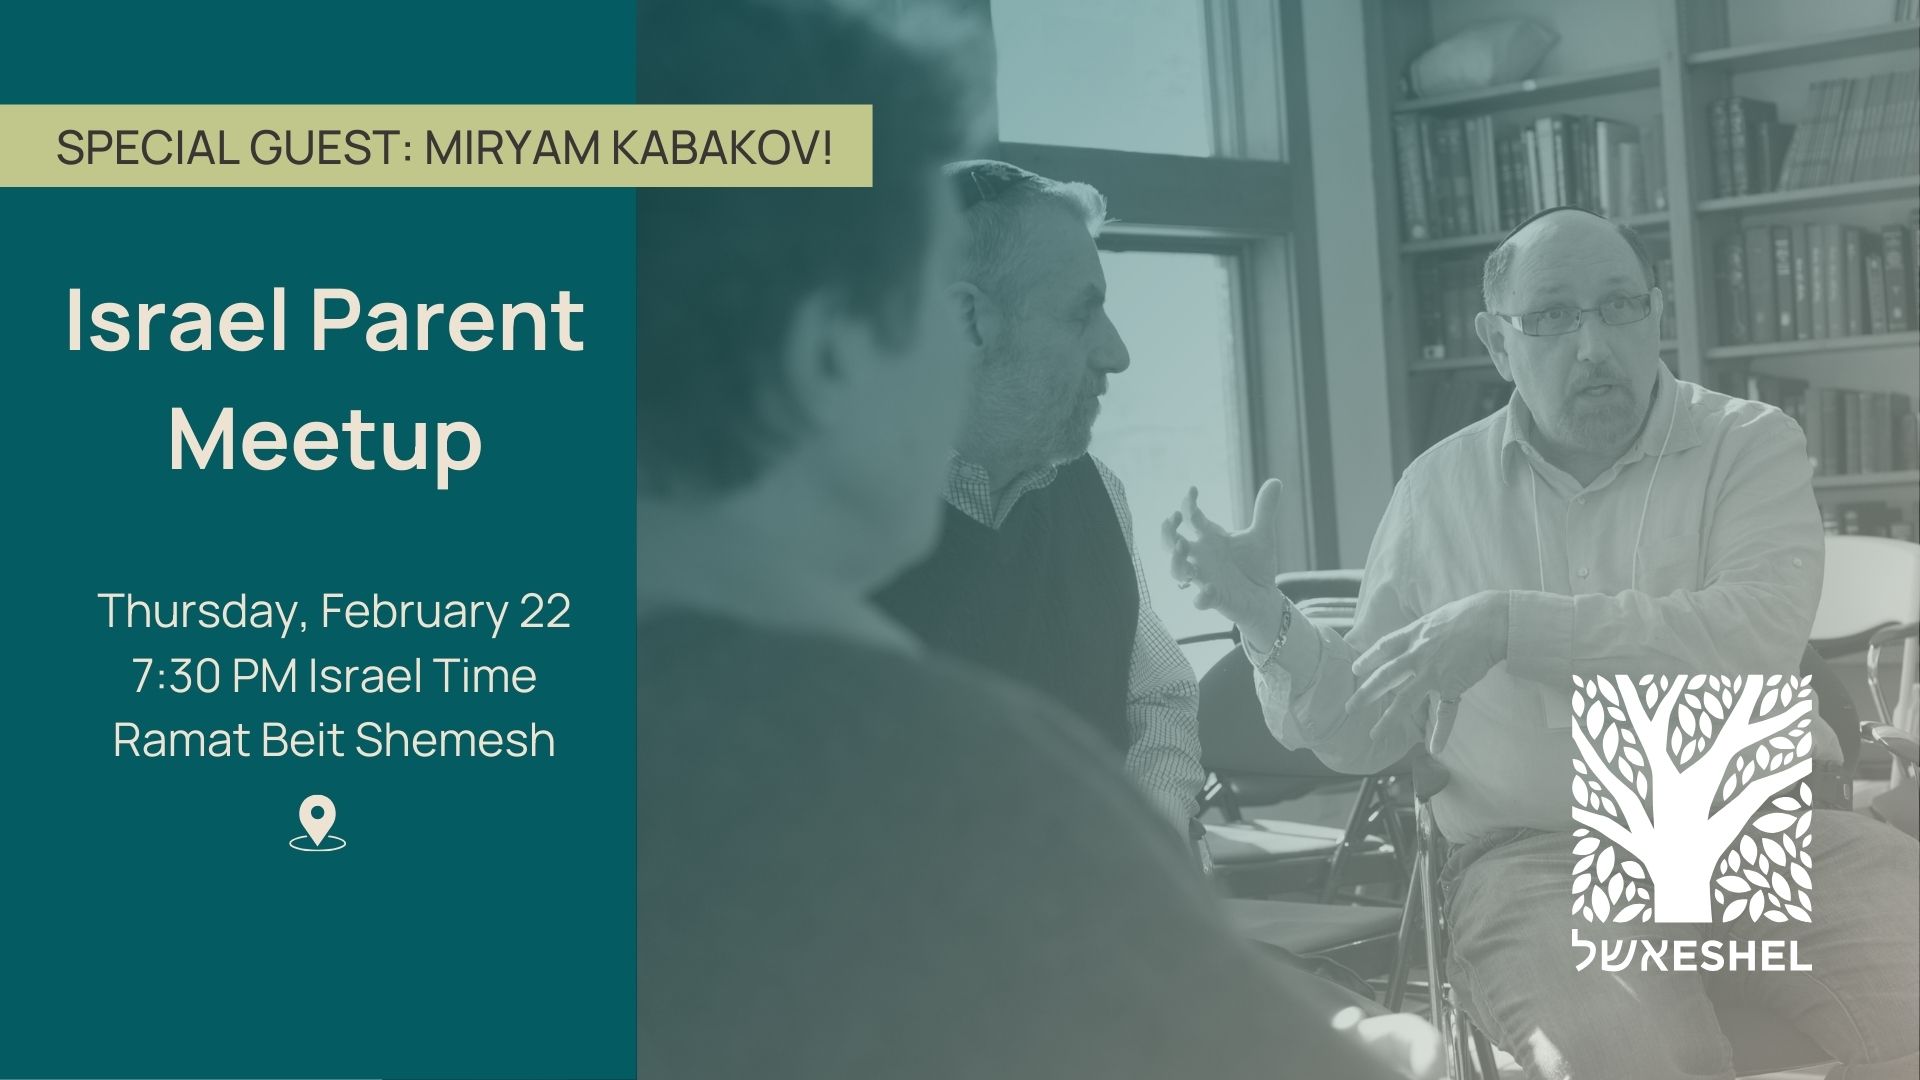 Israel Parent Meetup | Thursday February 22 at 7:30 pm IT in Ramat Beit Shemesh | Special Guest Miryam Kabakov!